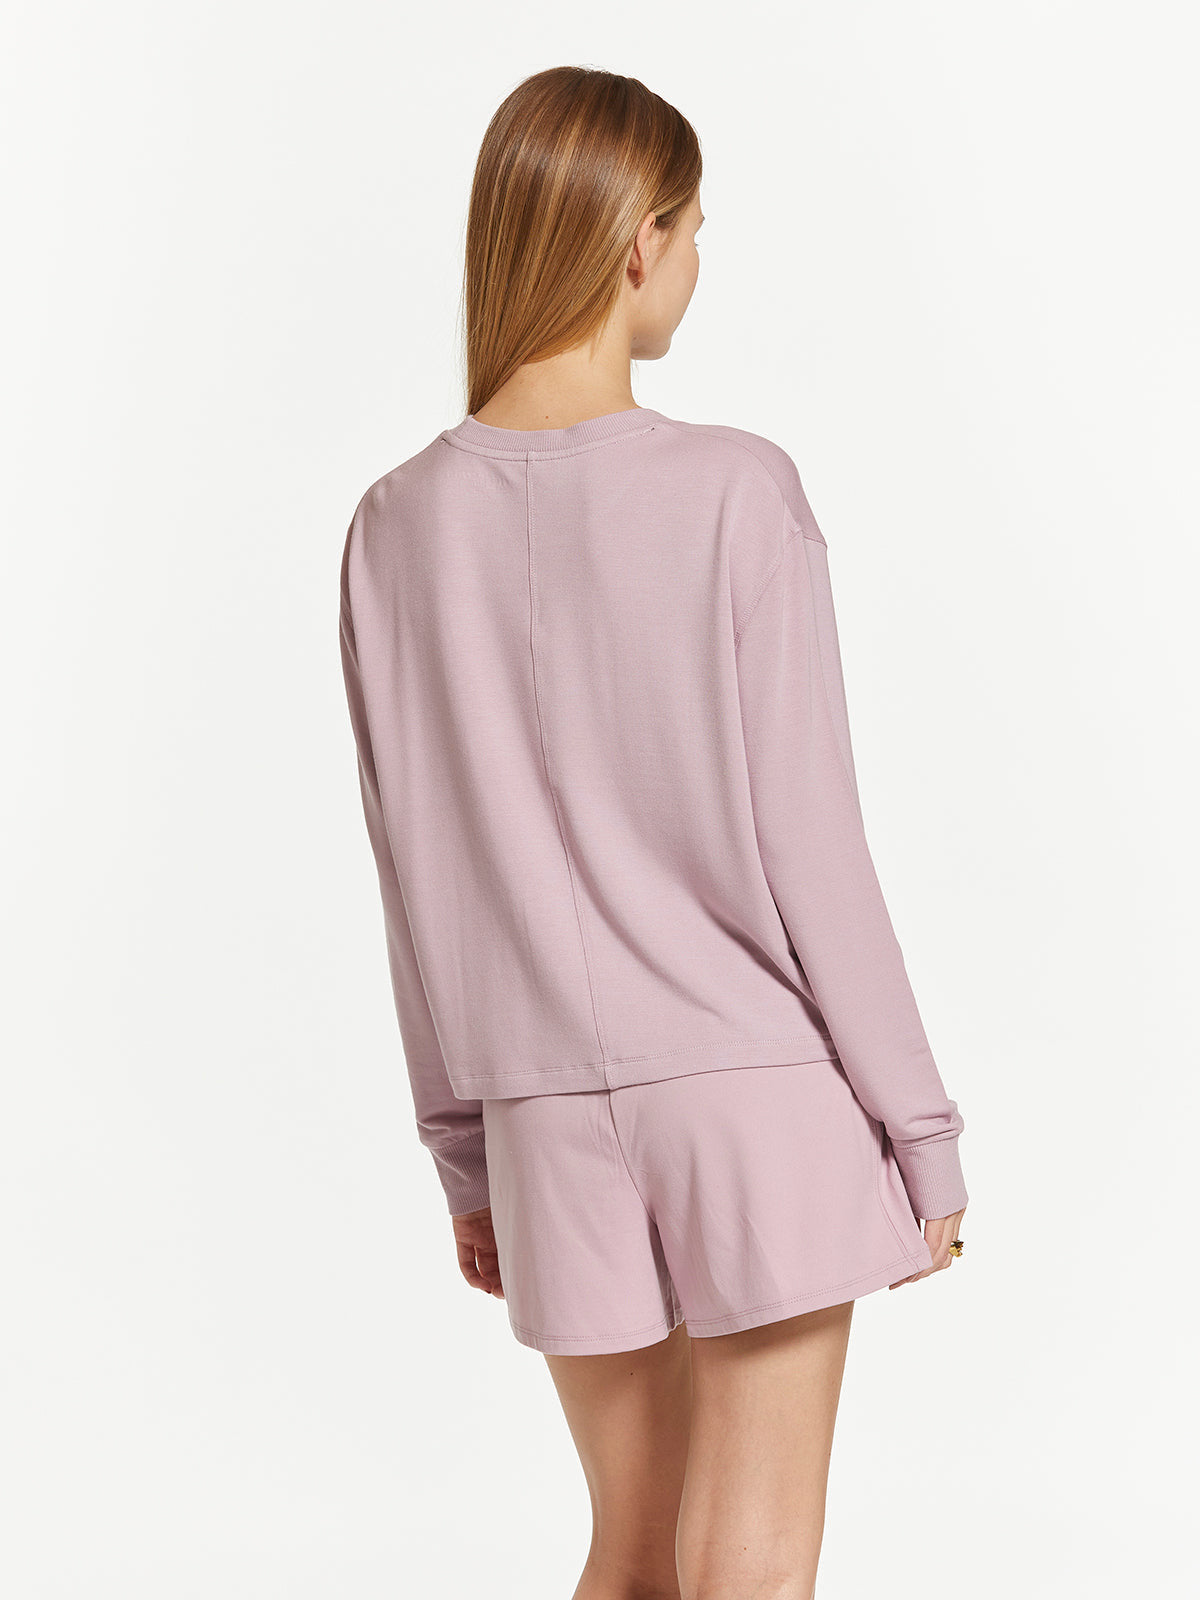 Thread & Supply® Haisley Long Sleeve Soft Top in Violet Rose Color